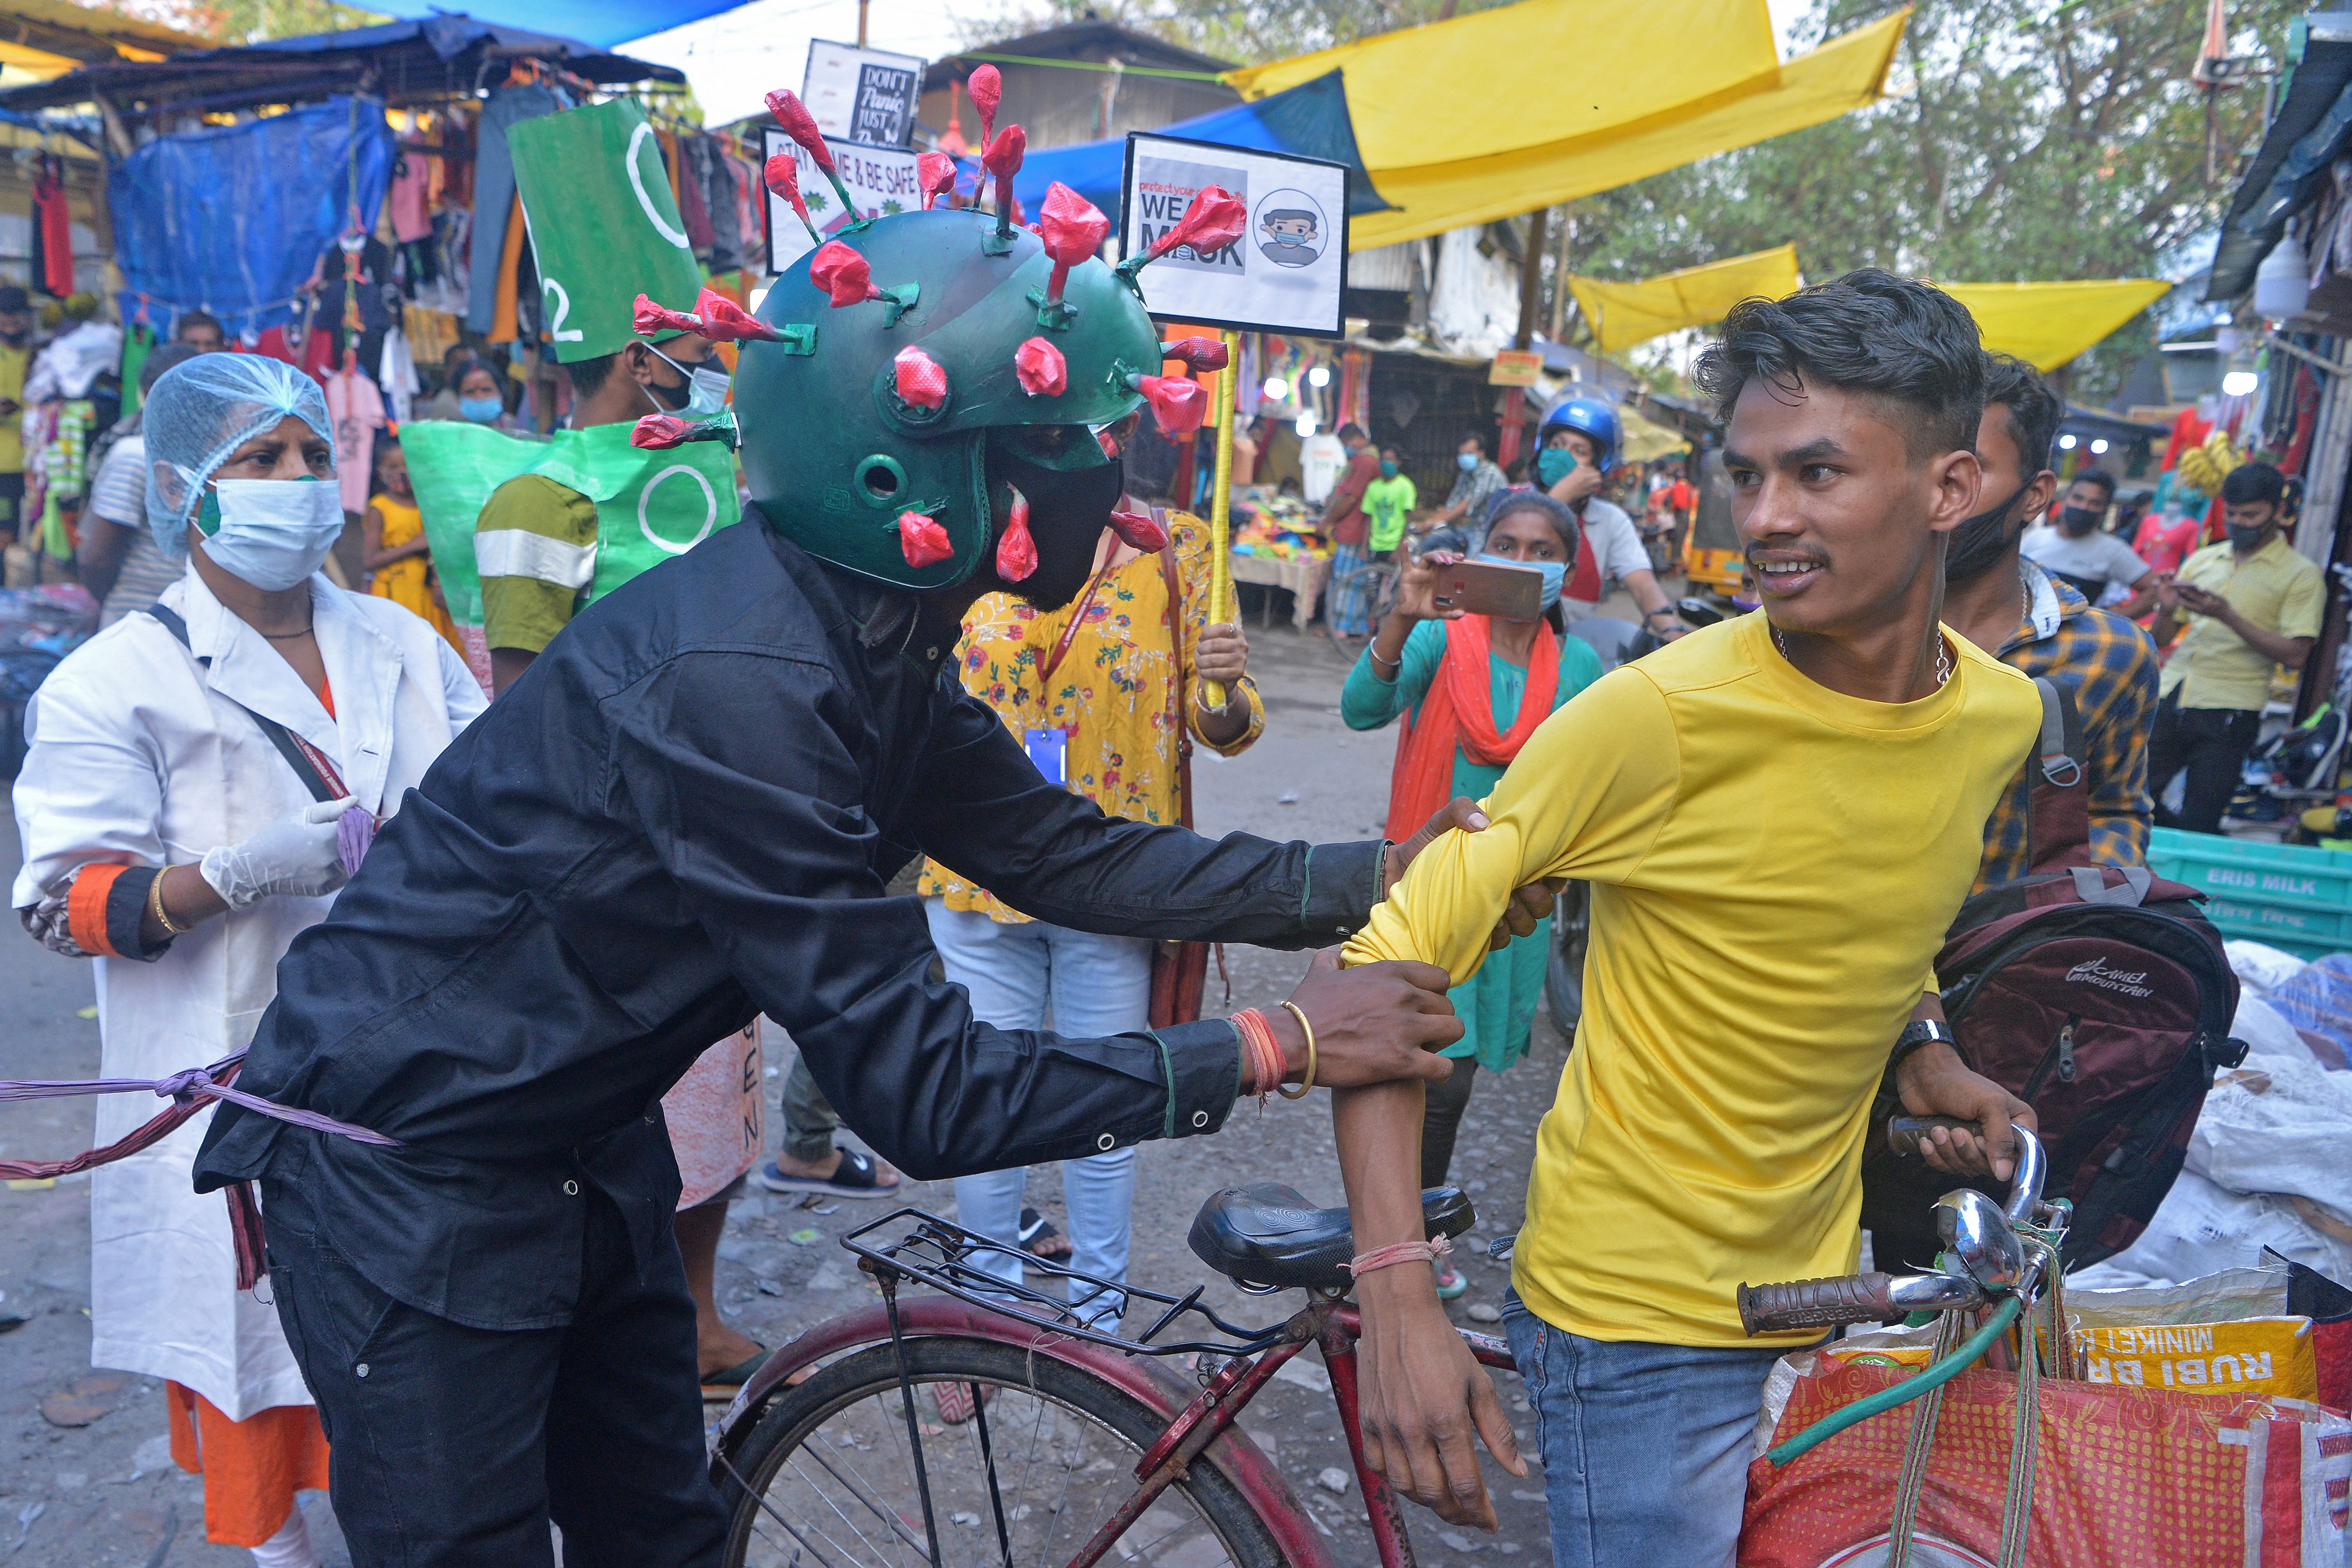 A man from a non-governmental organisation, wearing an outfit resembling the coronavirus, urges people to follow safety protocols in Siliguri on 25 April, 2021